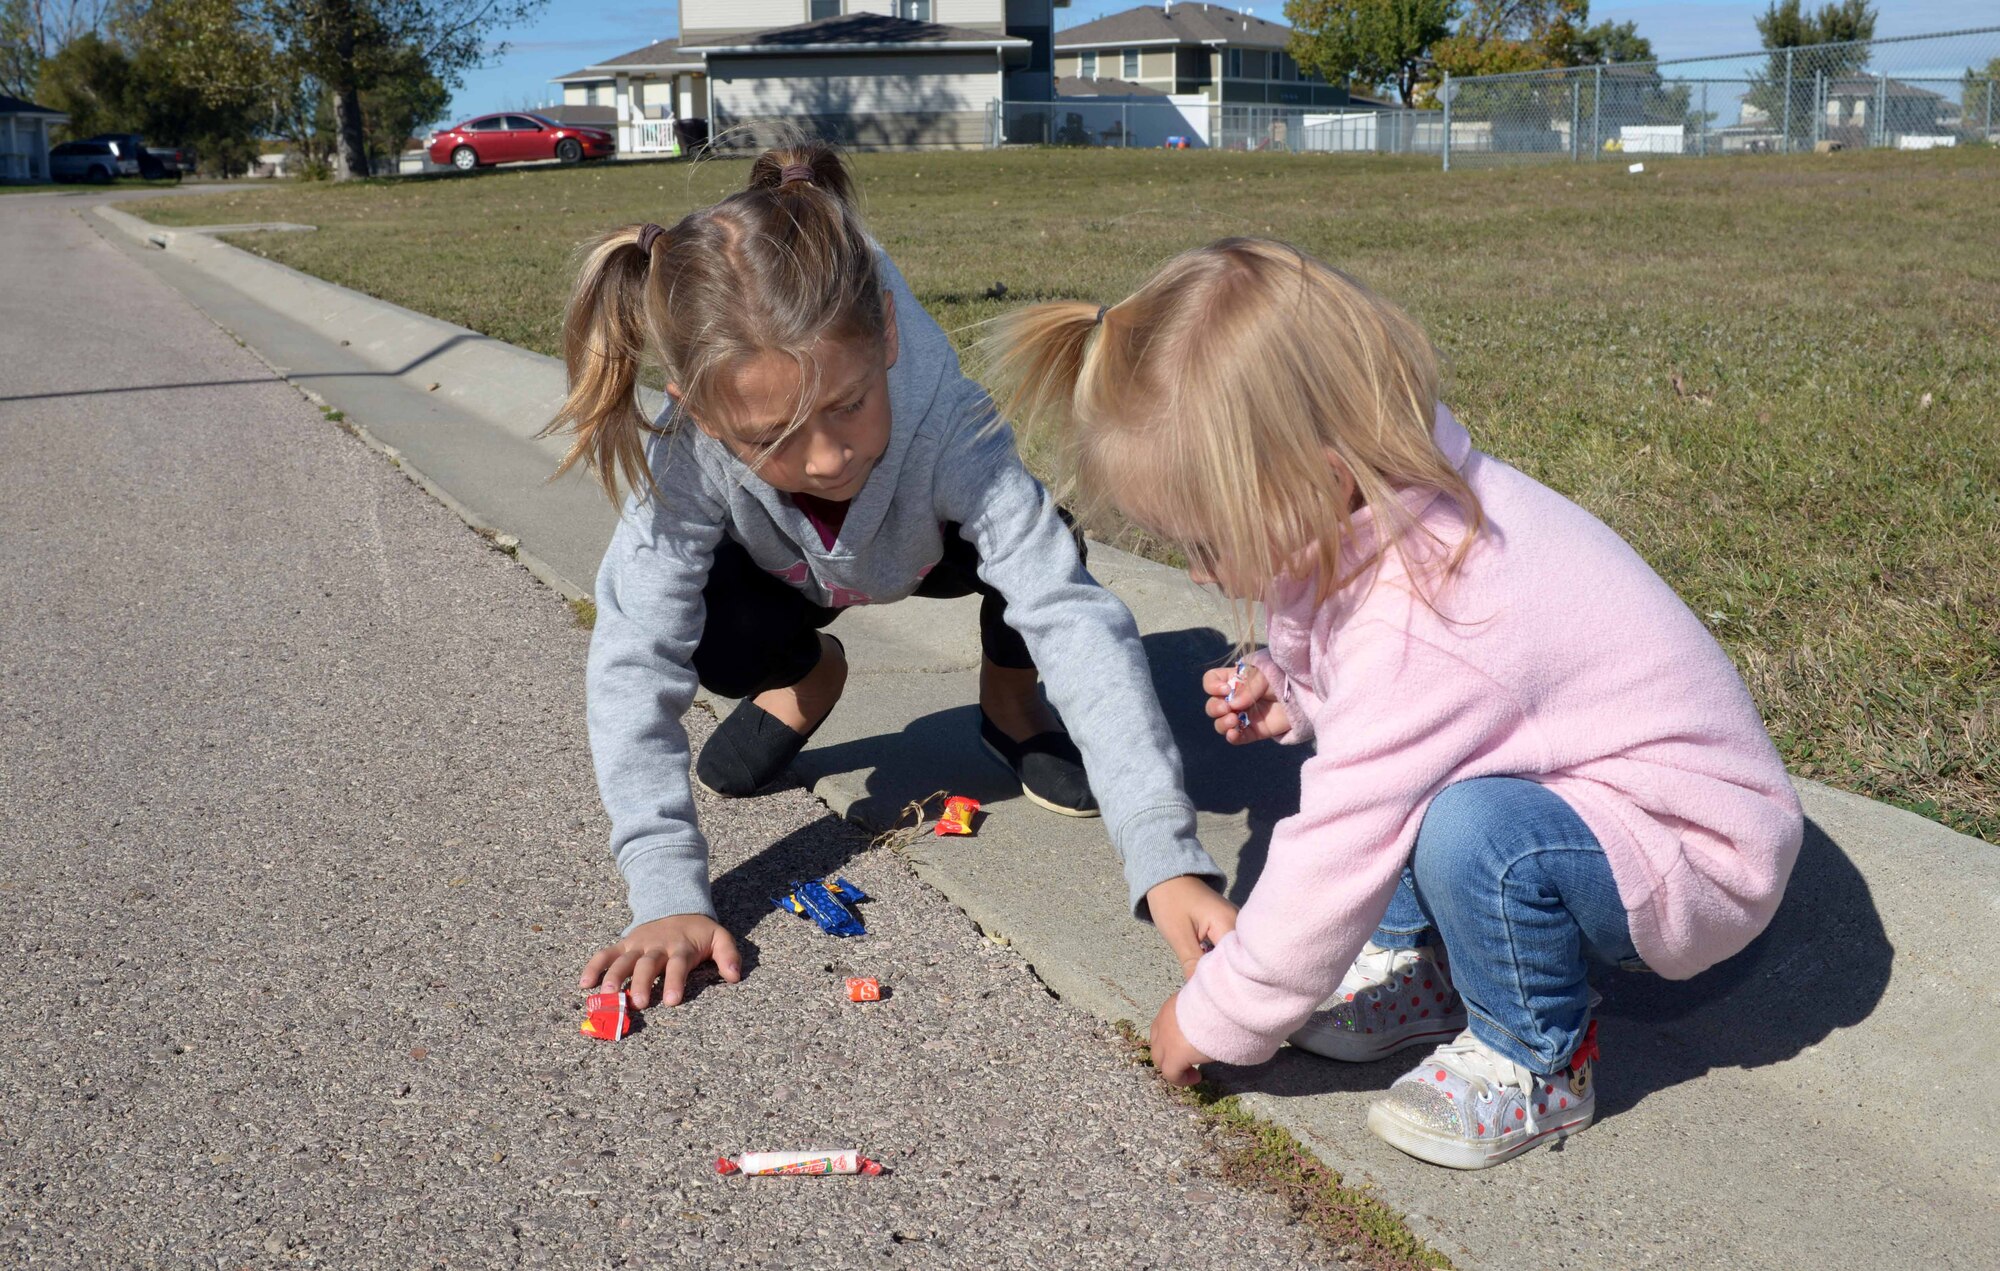 Children pick up candy thrown by 28th Civil Engineer Squadron personnel during a Fire Prevention Week parade at Ellsworth Air Force Base, S.D., Oct. 8, 2016. This year’s theme is “Don’t Wait – Check the Date! Replace Smoke Alarms Every 10 Years,” representing the final stage of a three-year effort to educate the public about essential elements of smoke alarm safety. (U.S. Air Force photo by Airman 1st Class Donald C. Knechtel)